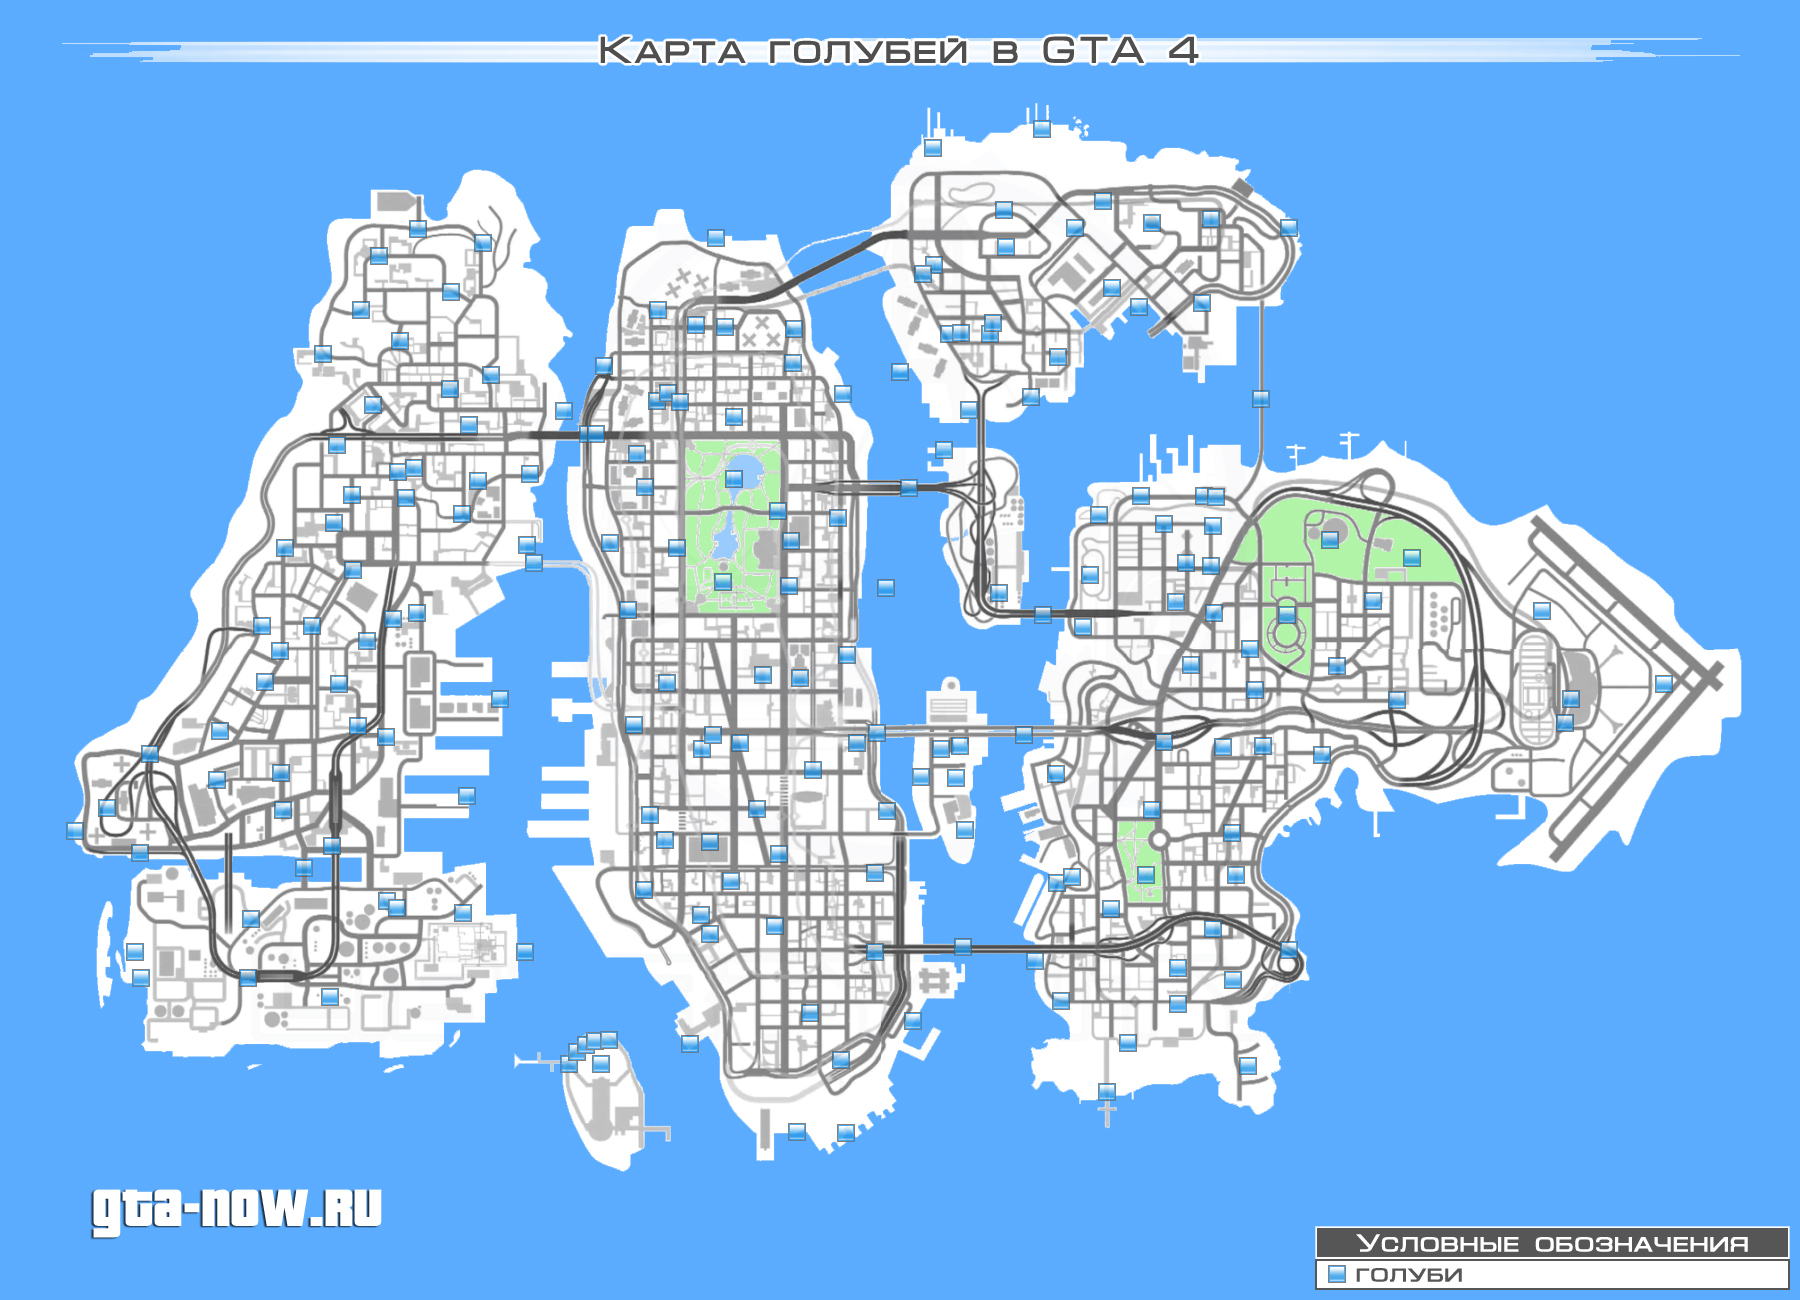 Gta 5 map with street names фото 105